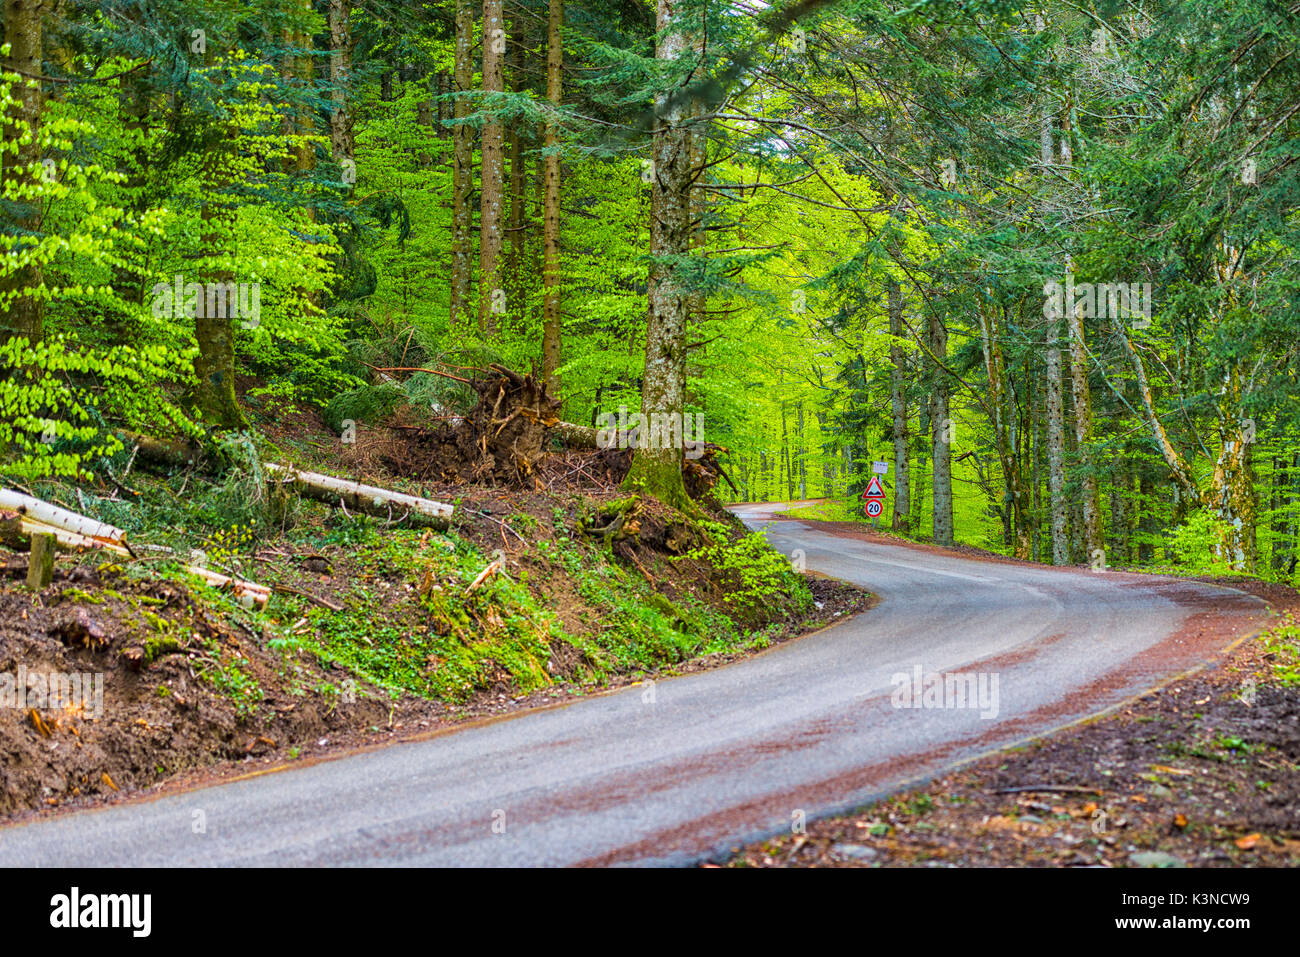 Road with curves in the forest,  Foreste Casentinesi NP, Emilia Romagna district, Italy Stock Photo